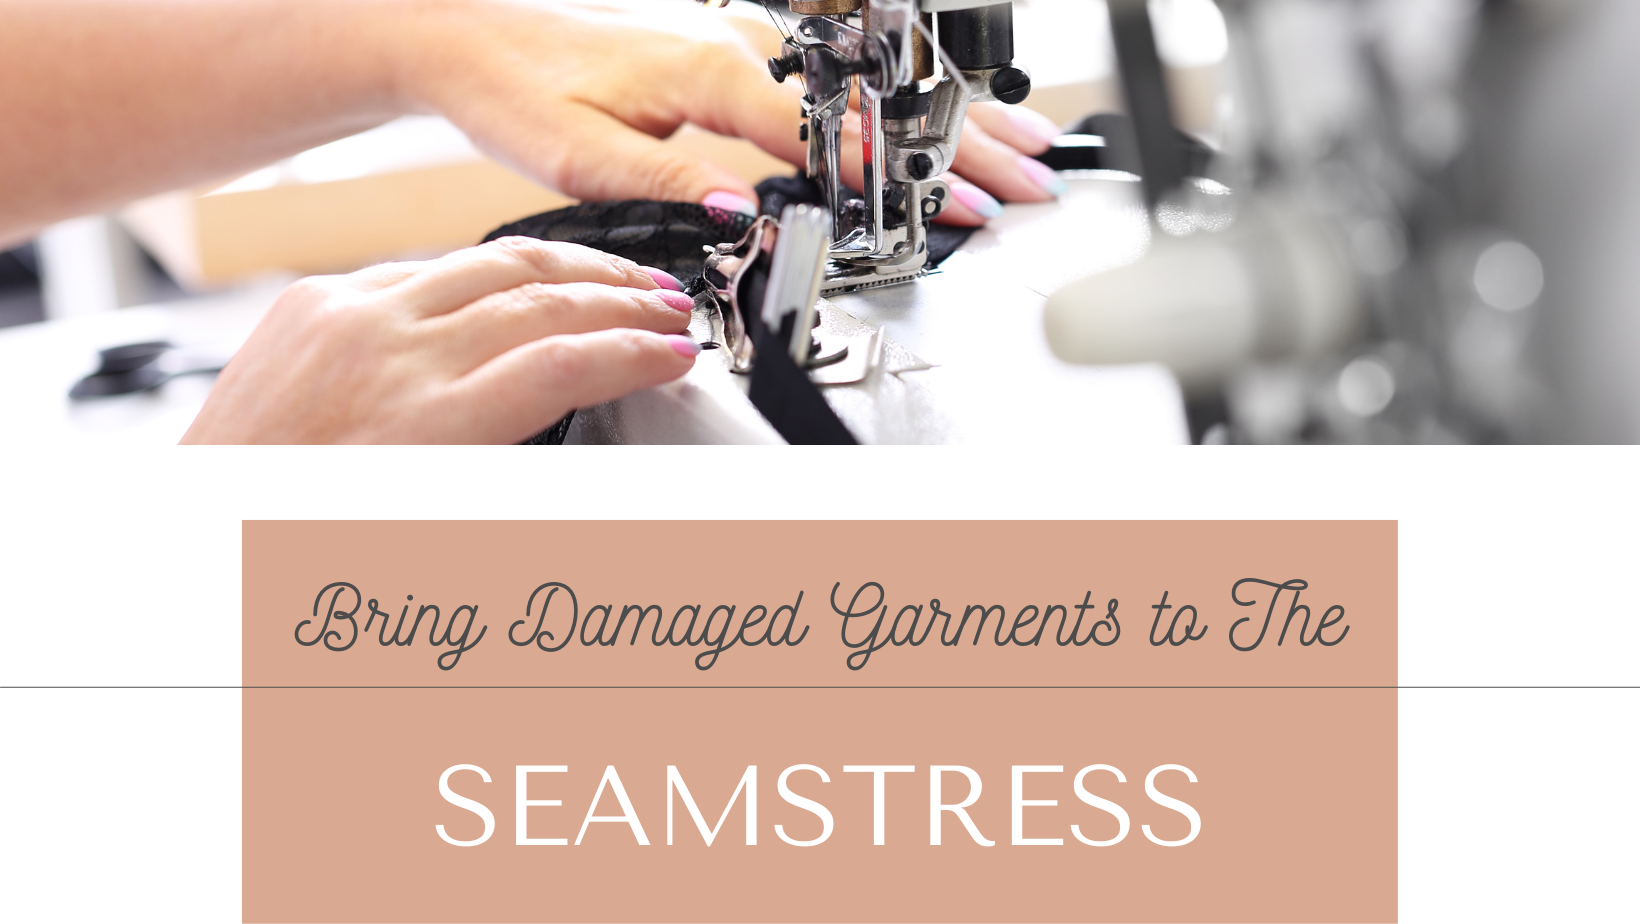 When your clothes and garments get damamged, don't throw them away! Bring them here for alteration and repair services